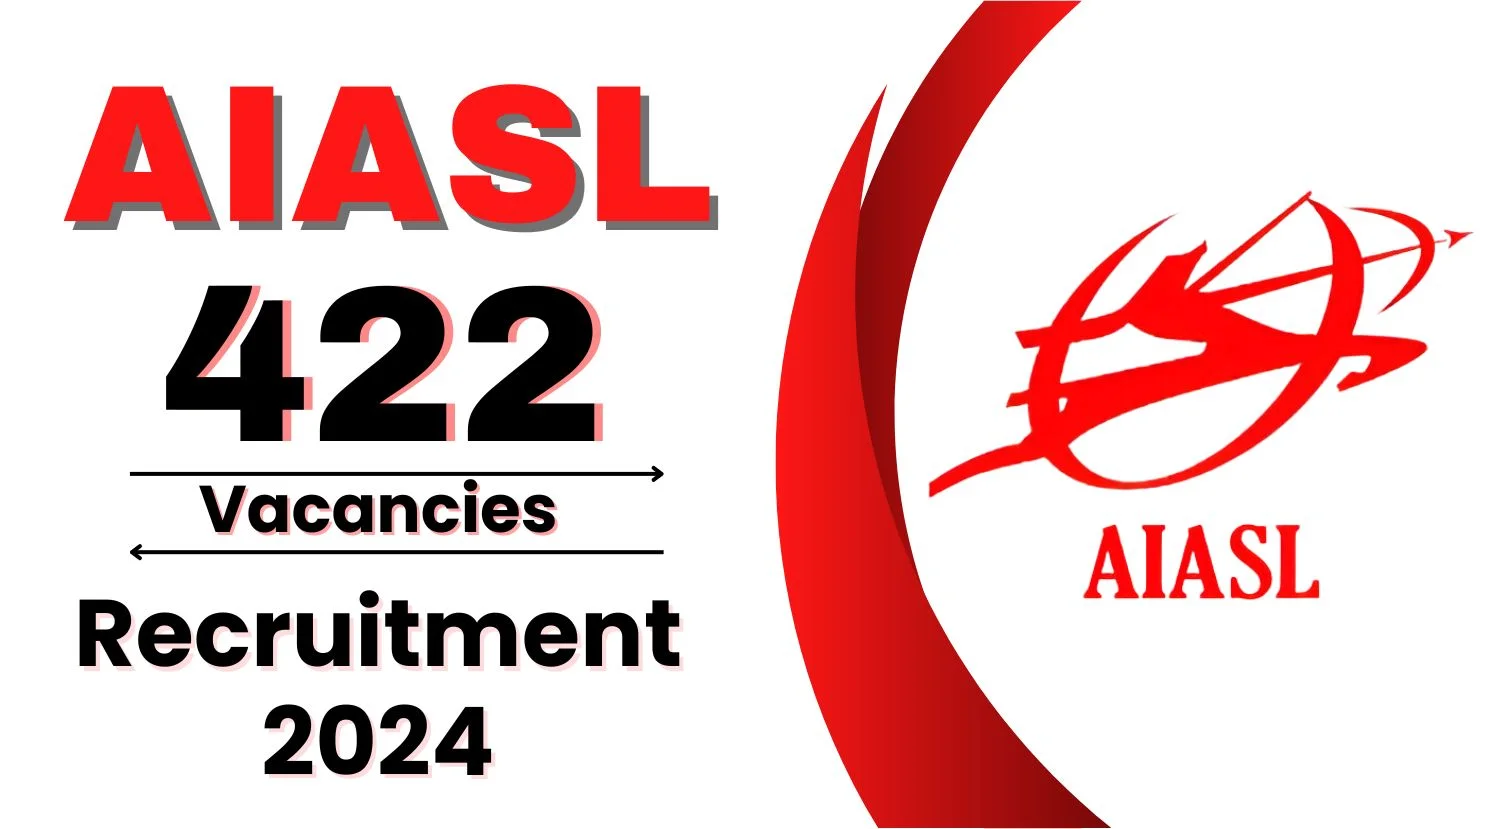 AIASL Recruitment 2024 Notification Out for 422 Vacancies